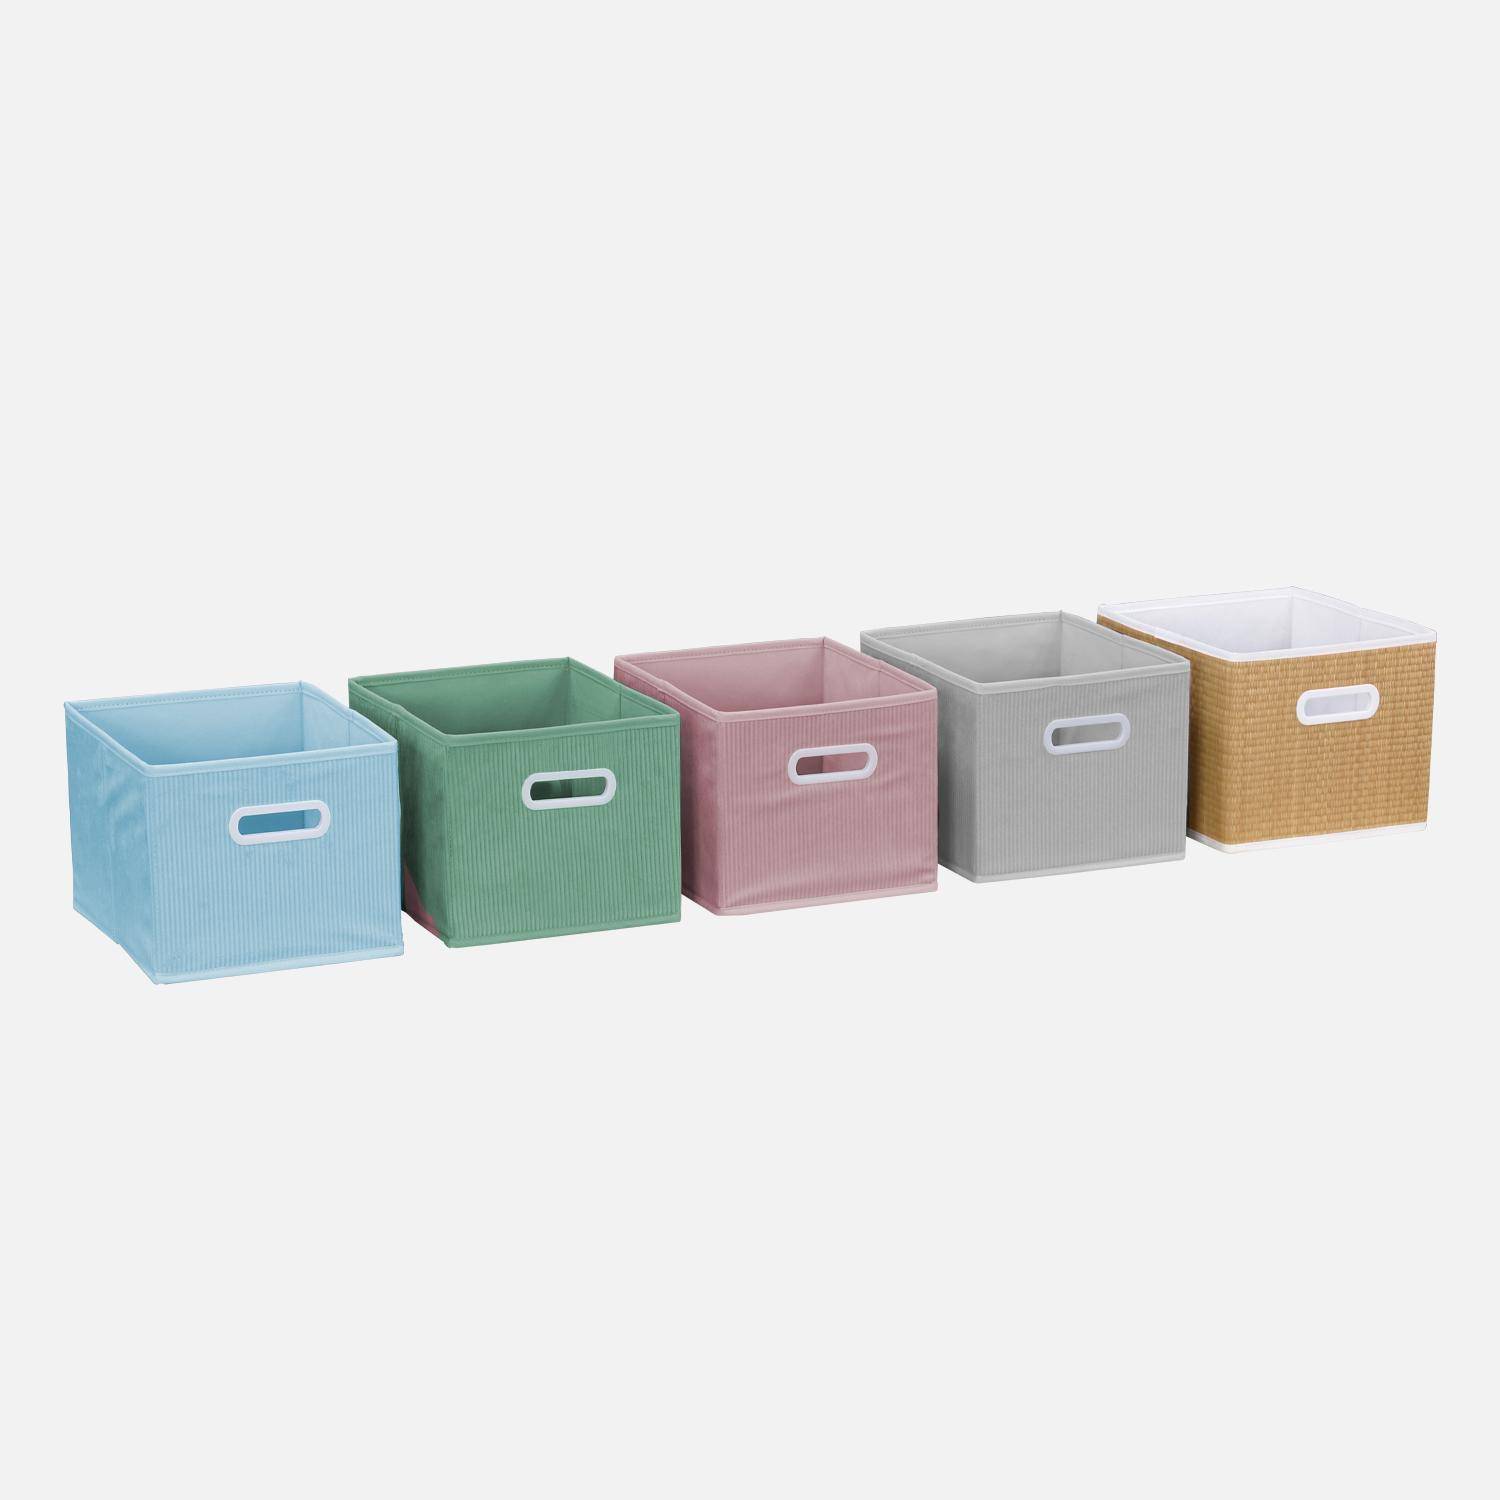 Storage unit for children with 7 compartments and 2 pink and 2 grey velvet baskets Photo4